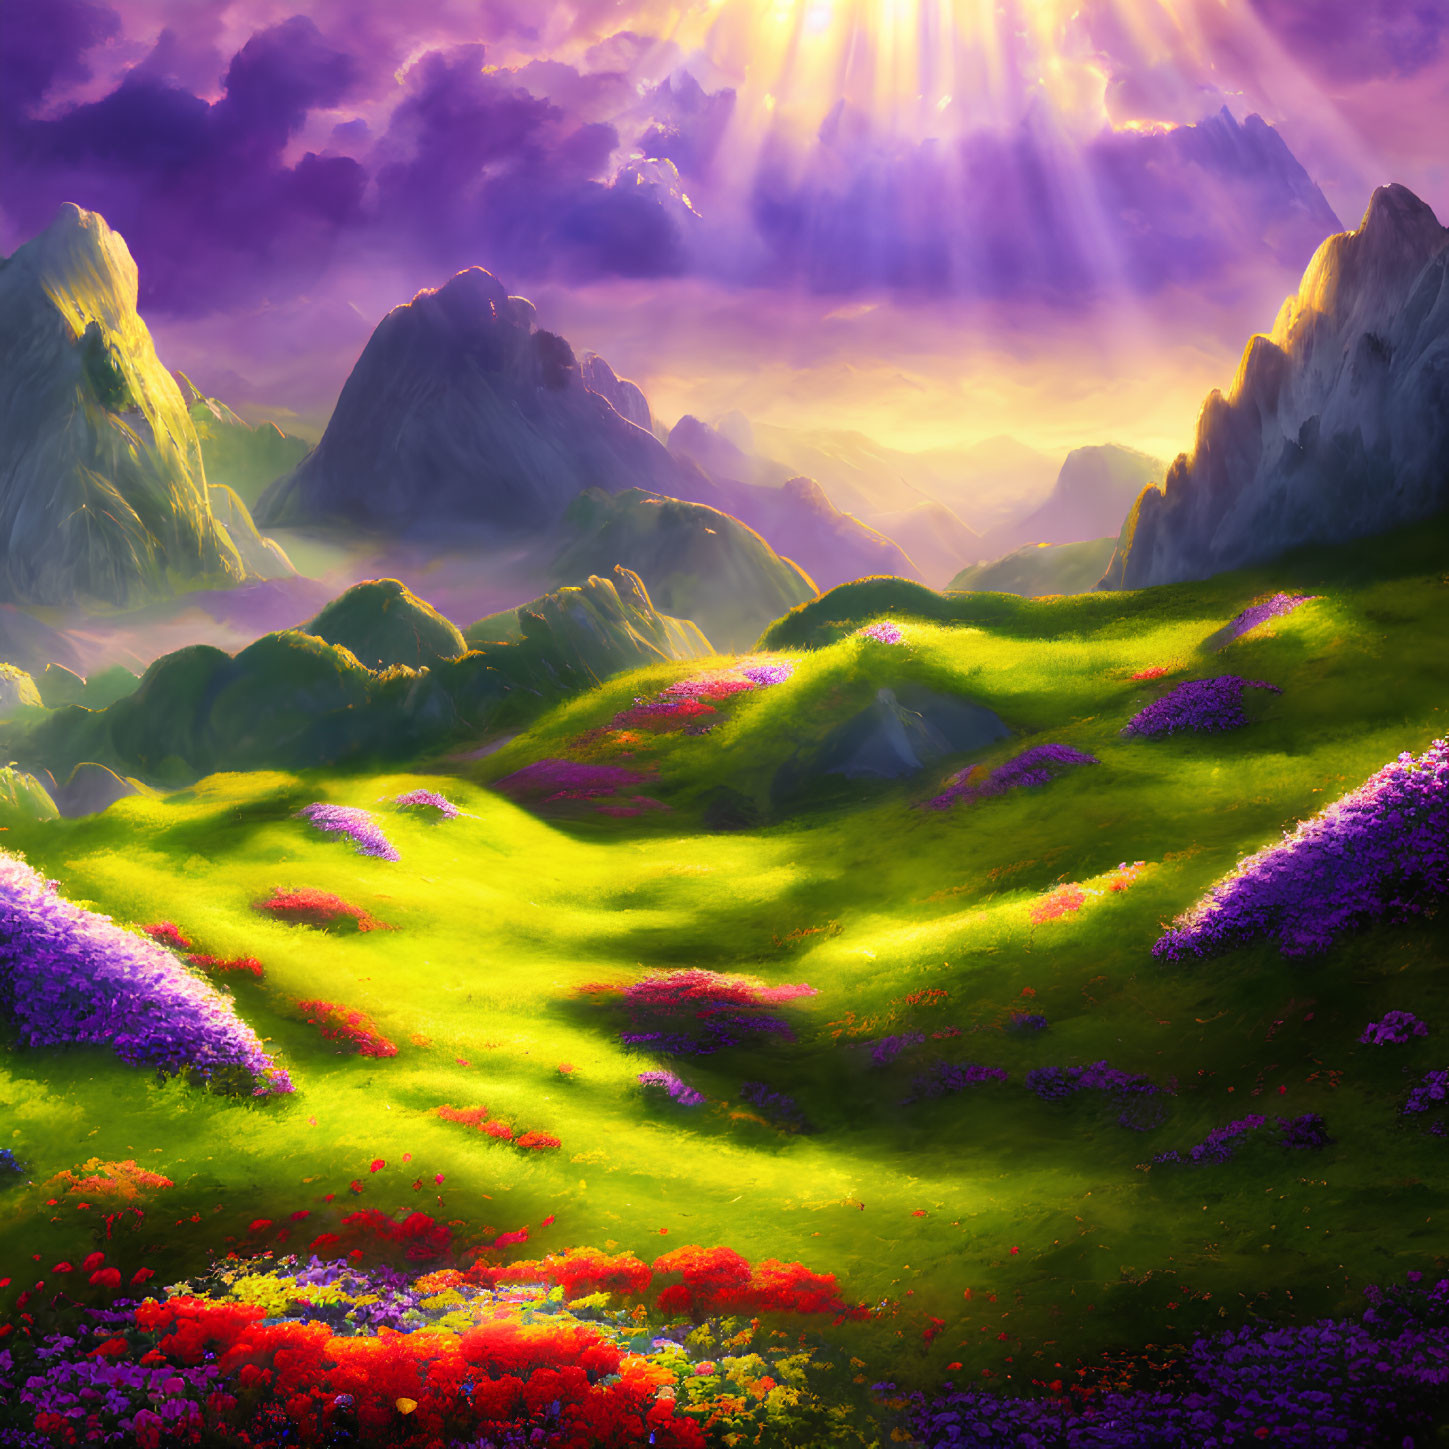 Colorful Fantasy Landscape with Sunbeams and Mountains